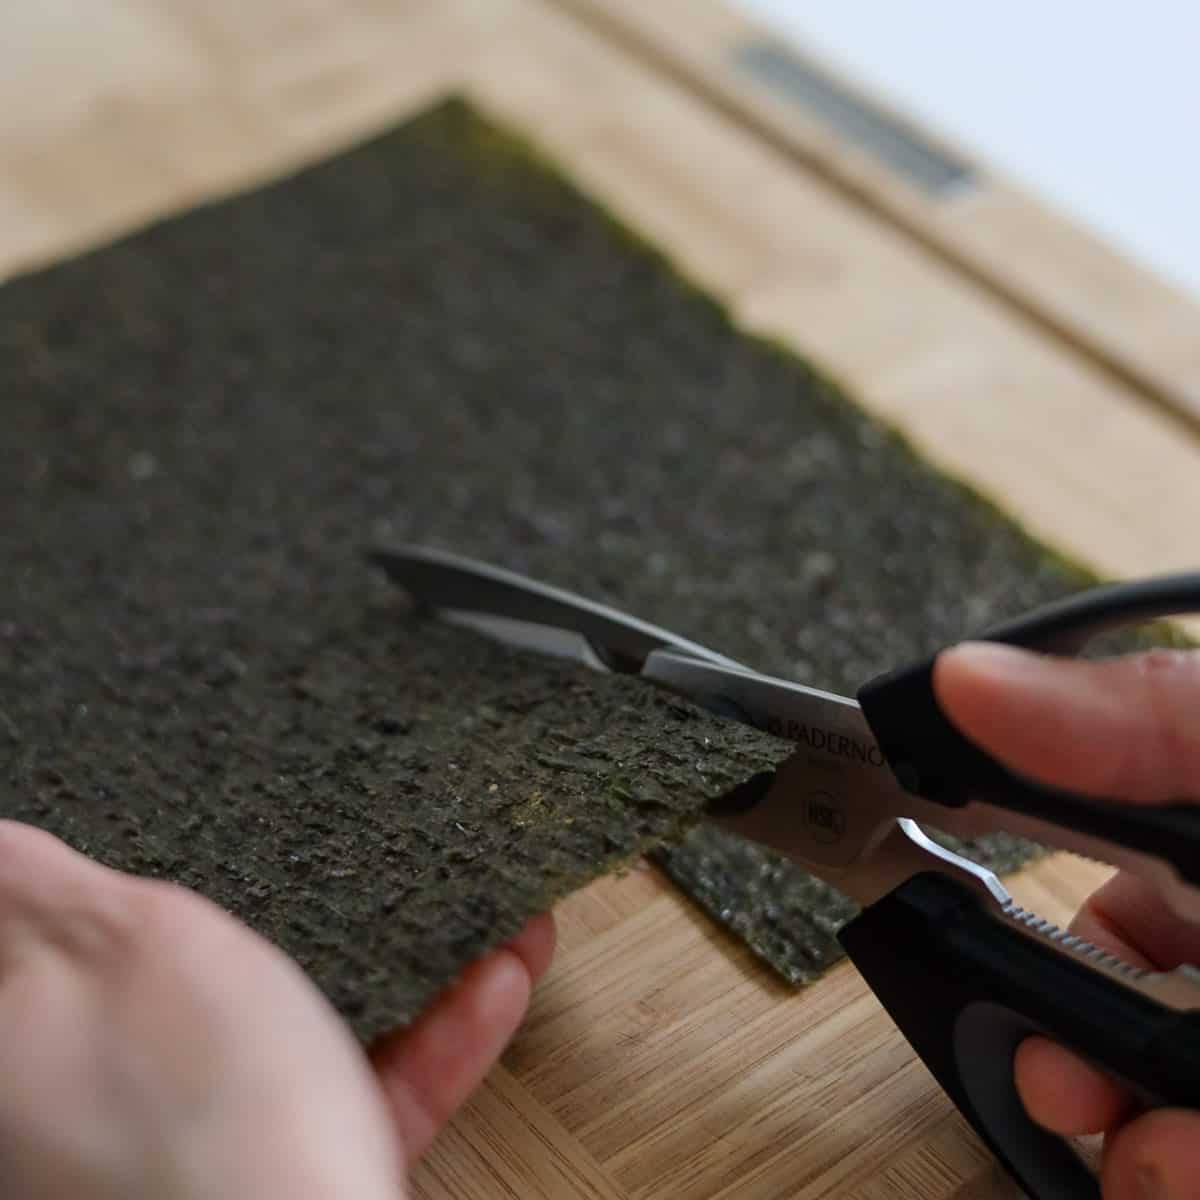 Place a sheet of nori rough side up vertically facing you. Using clean scissor a vertical slit halfway up the sheet. 